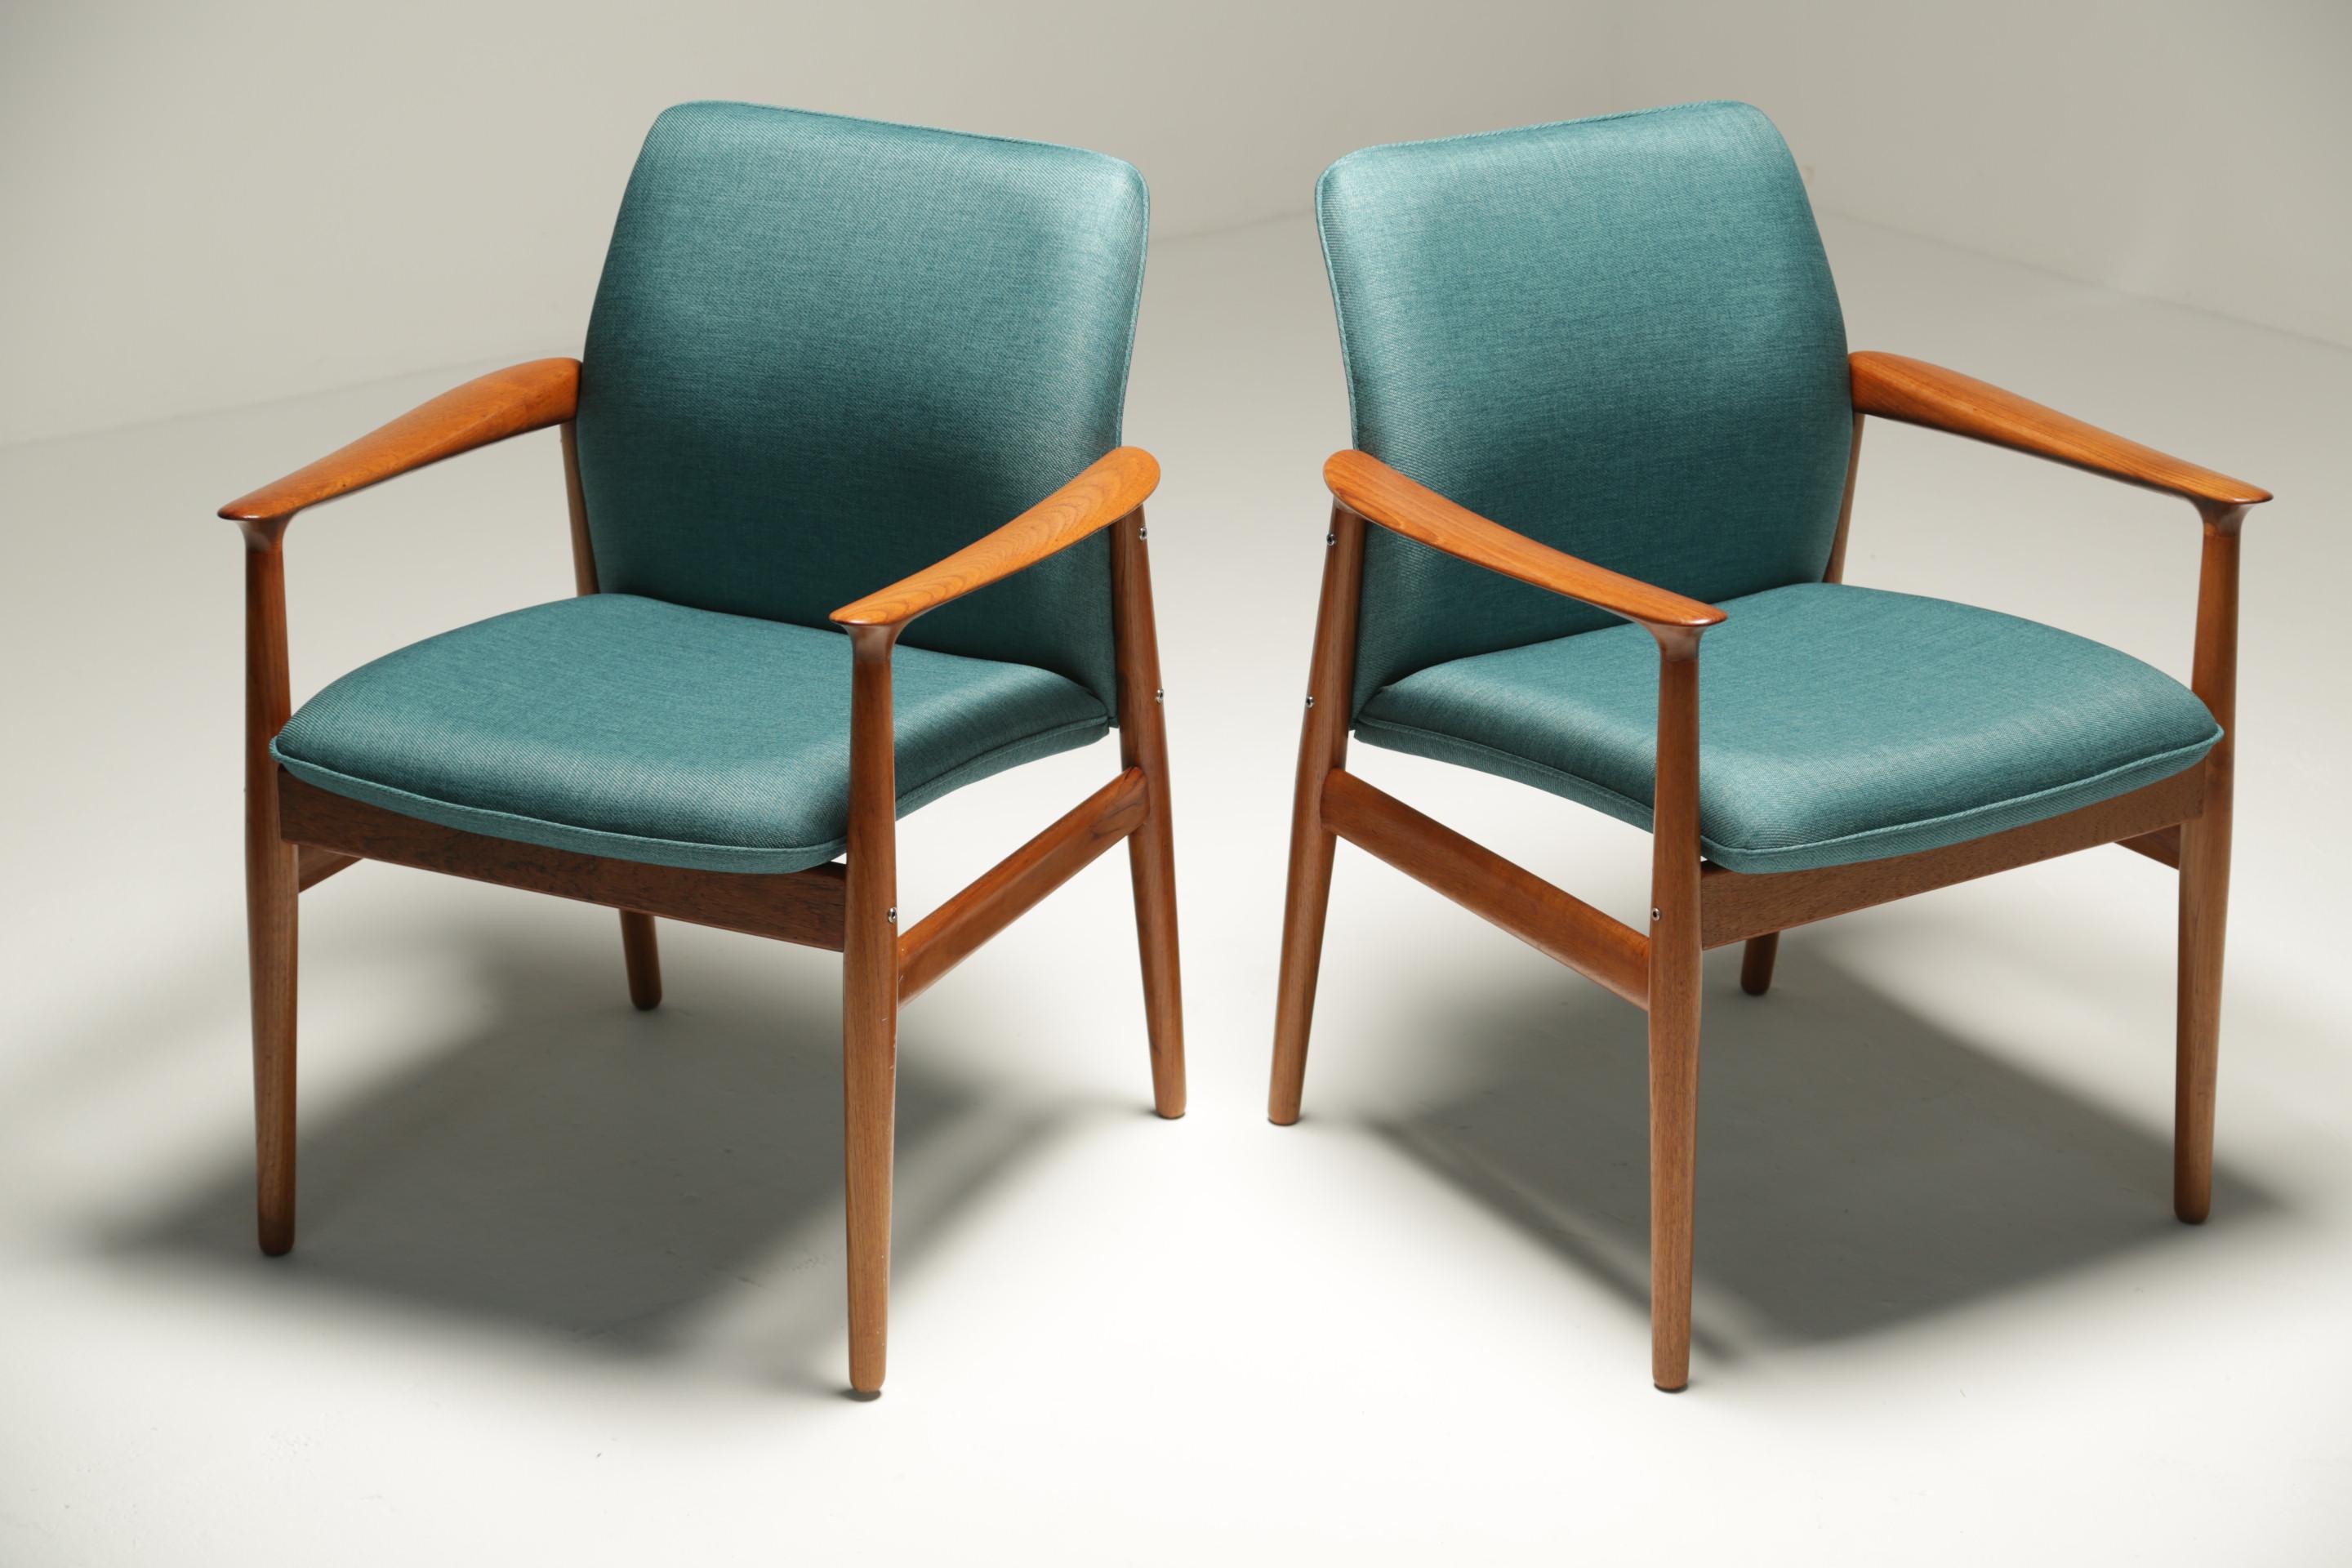 A pair of Grete Jalk (pronouced Greata Yalk) teak armchairs. These chairs were produced in the 1960s by Glostrup and still have the original makers label on the frames. The chairs have been reupholstered in a modern teal fabric. A great pair of